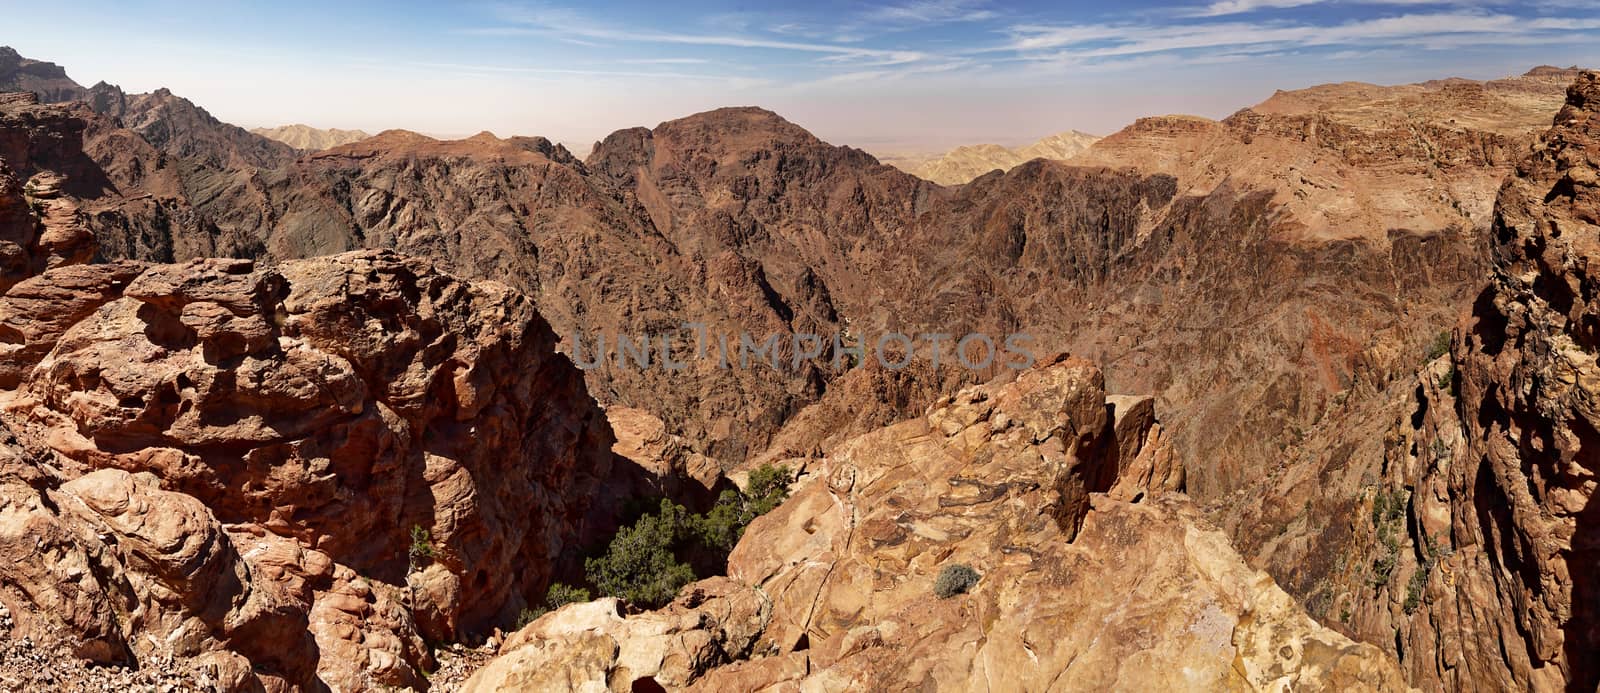 Panoramic view in high resolution in Petra, Wadi Musa, Jordan, middle east, composed of several single photos